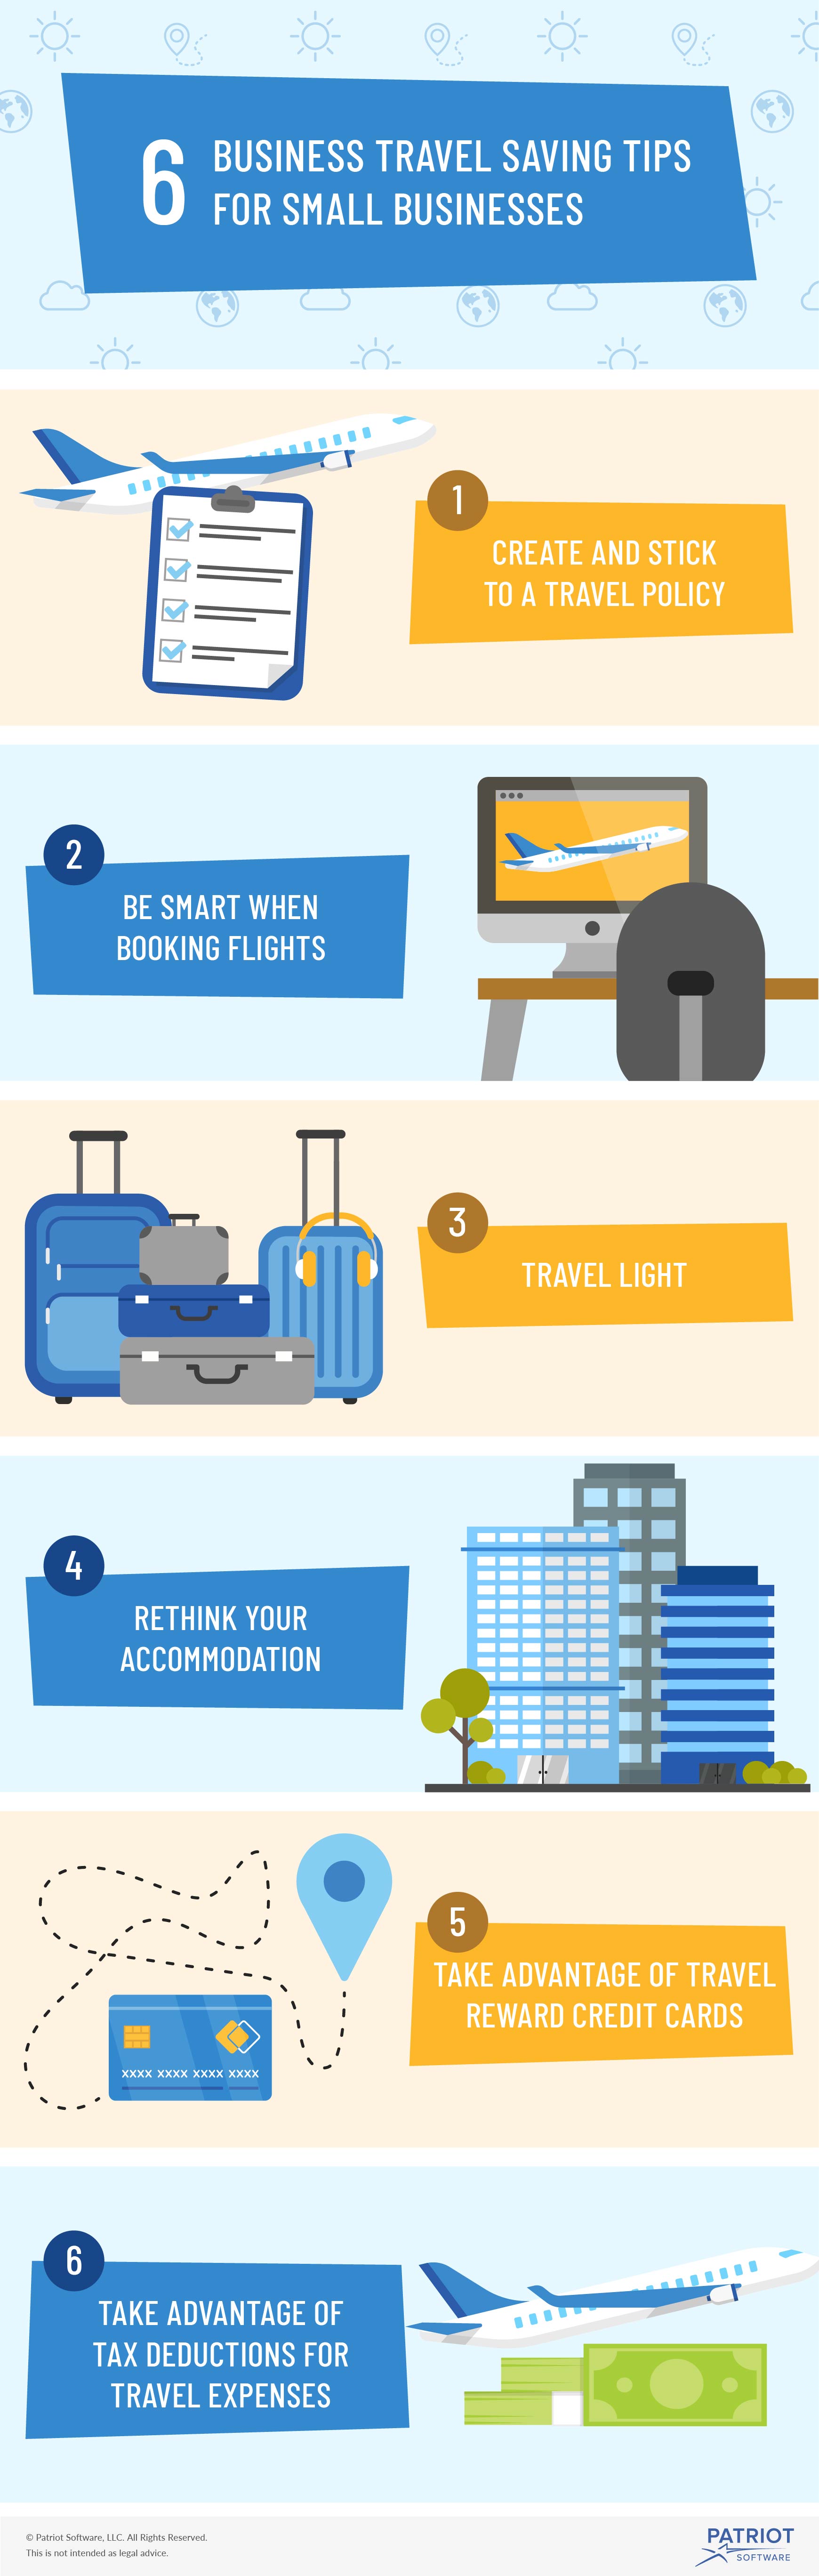 compile travel tips